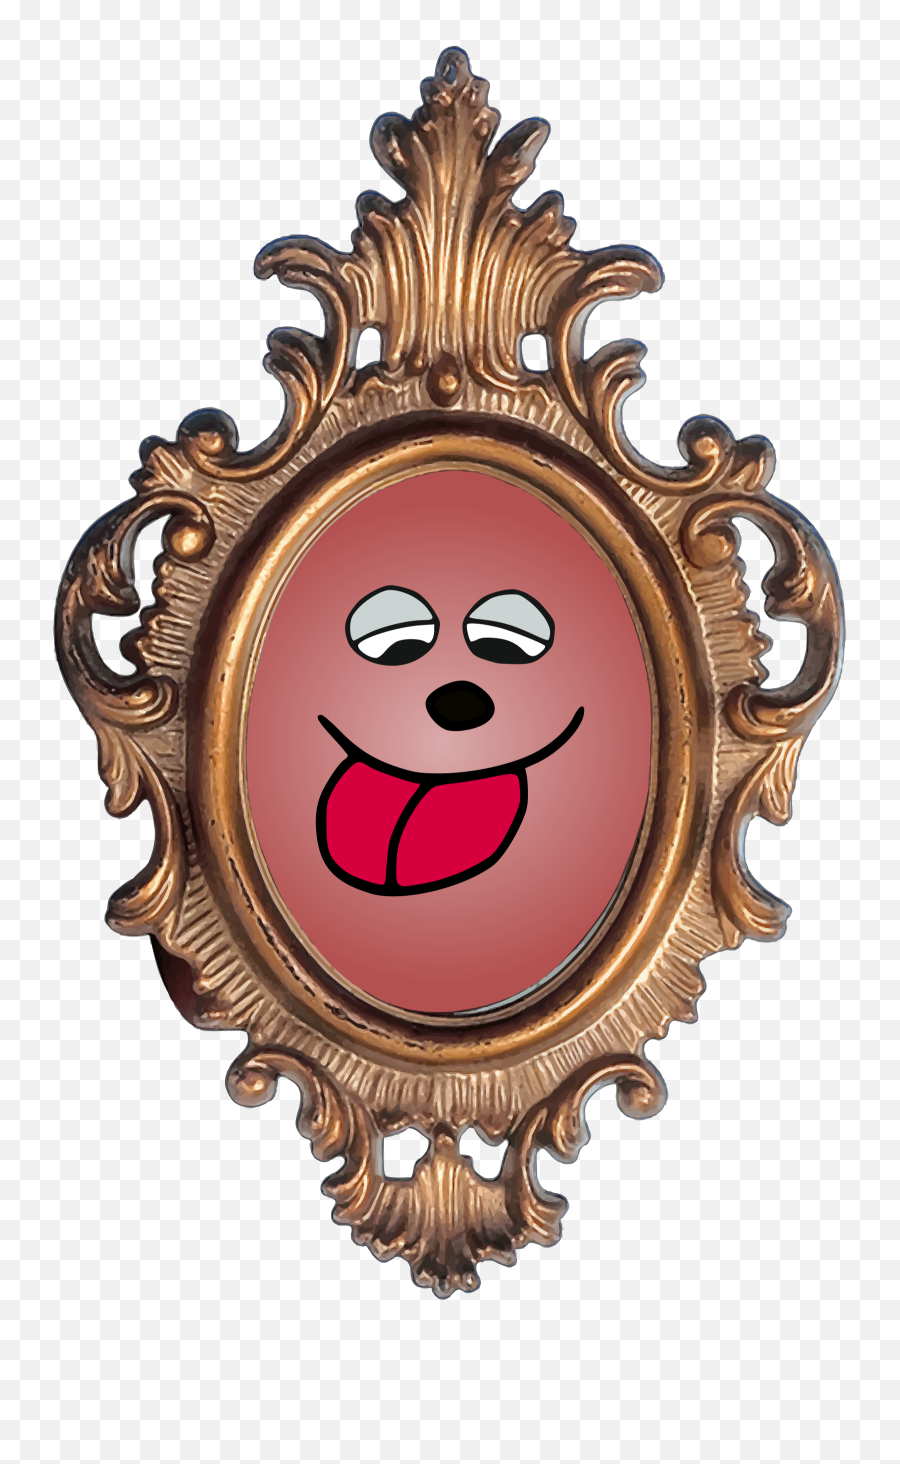 Silly Face Ornate Frame Free Svg - Circular Ornate Picture Frame Png,Ornate Frame Png